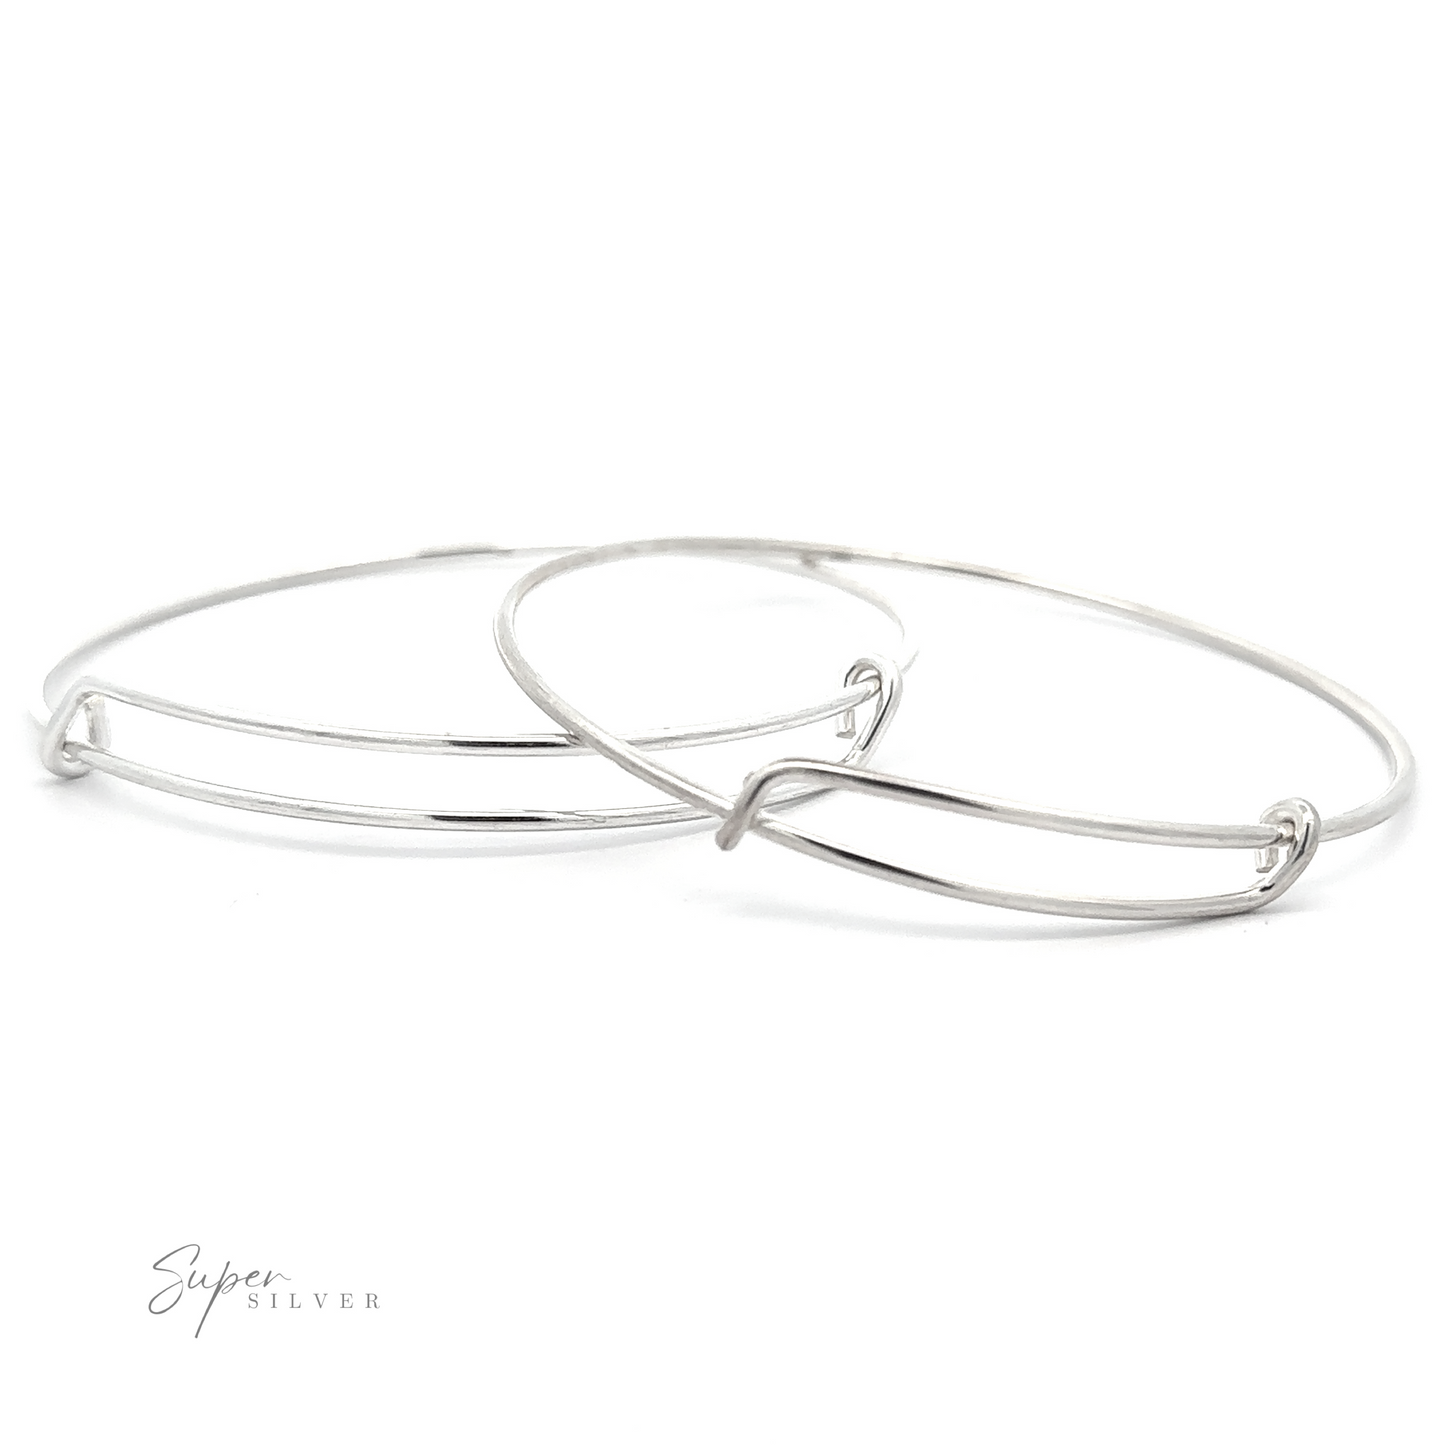 
                  
                    Two thin, sterling silver bangles are slightly overlapping on a white background. One bangle has a minimalist design with a subtle twist detail. The "Simple Adjustable Bangle Bracelet" logo is visible in the bottom left corner, enhancing the elegance of these exquisite pieces.
                  
                